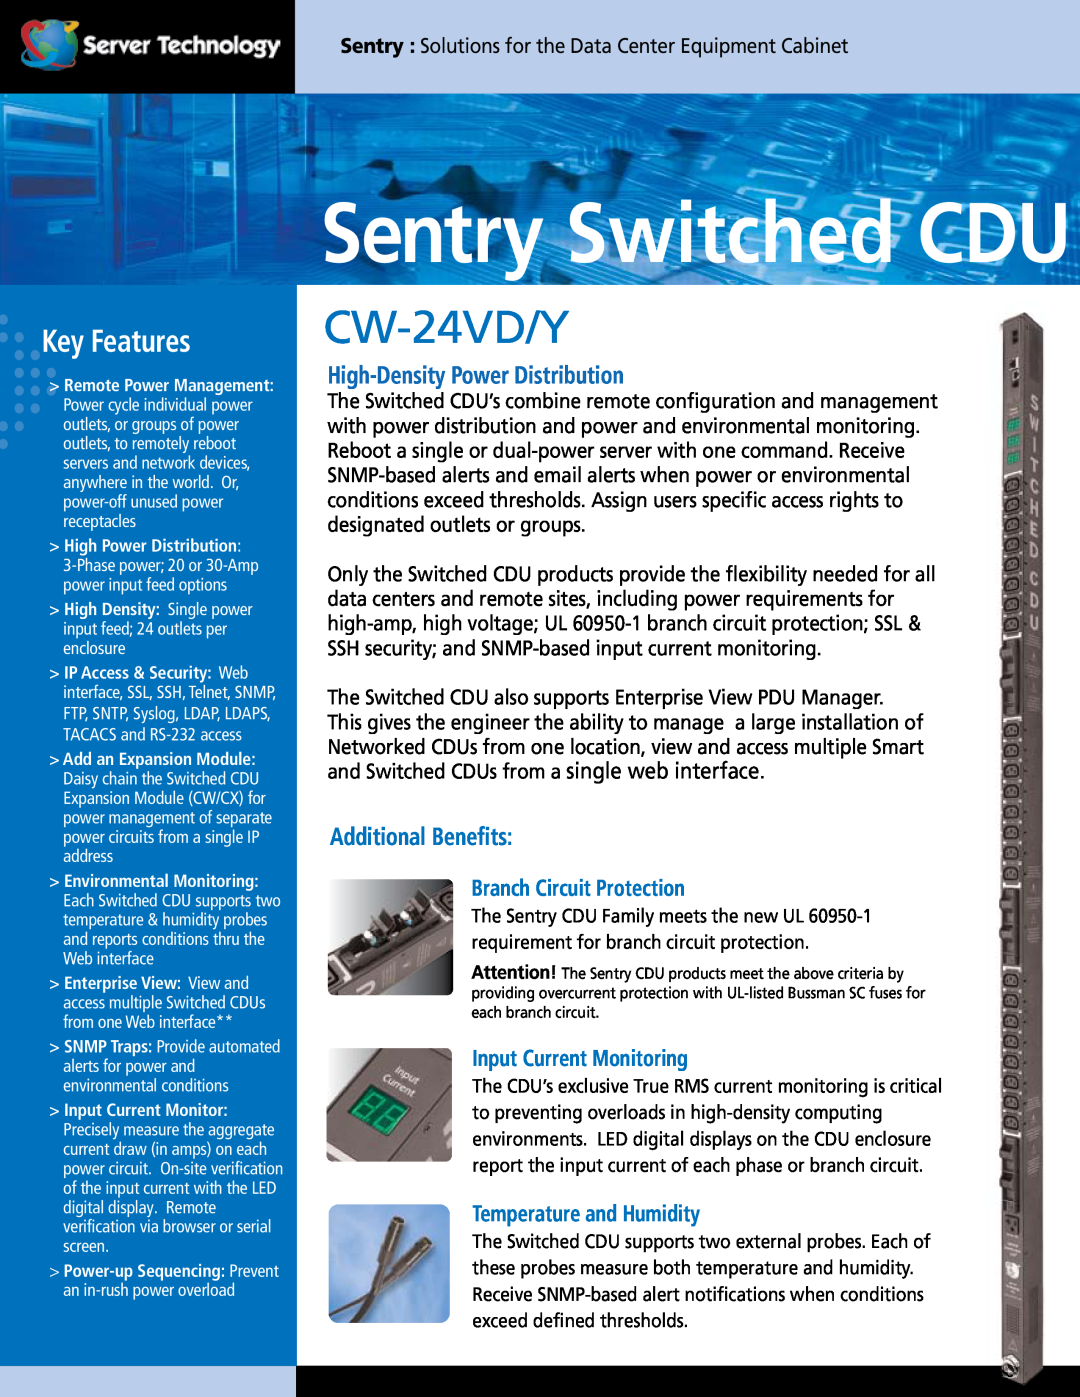 Server Technology CDU CW-24VD technical specifications Sentry Switched CDU, CW-24VD/Y, Key Features, Additional Benefits 